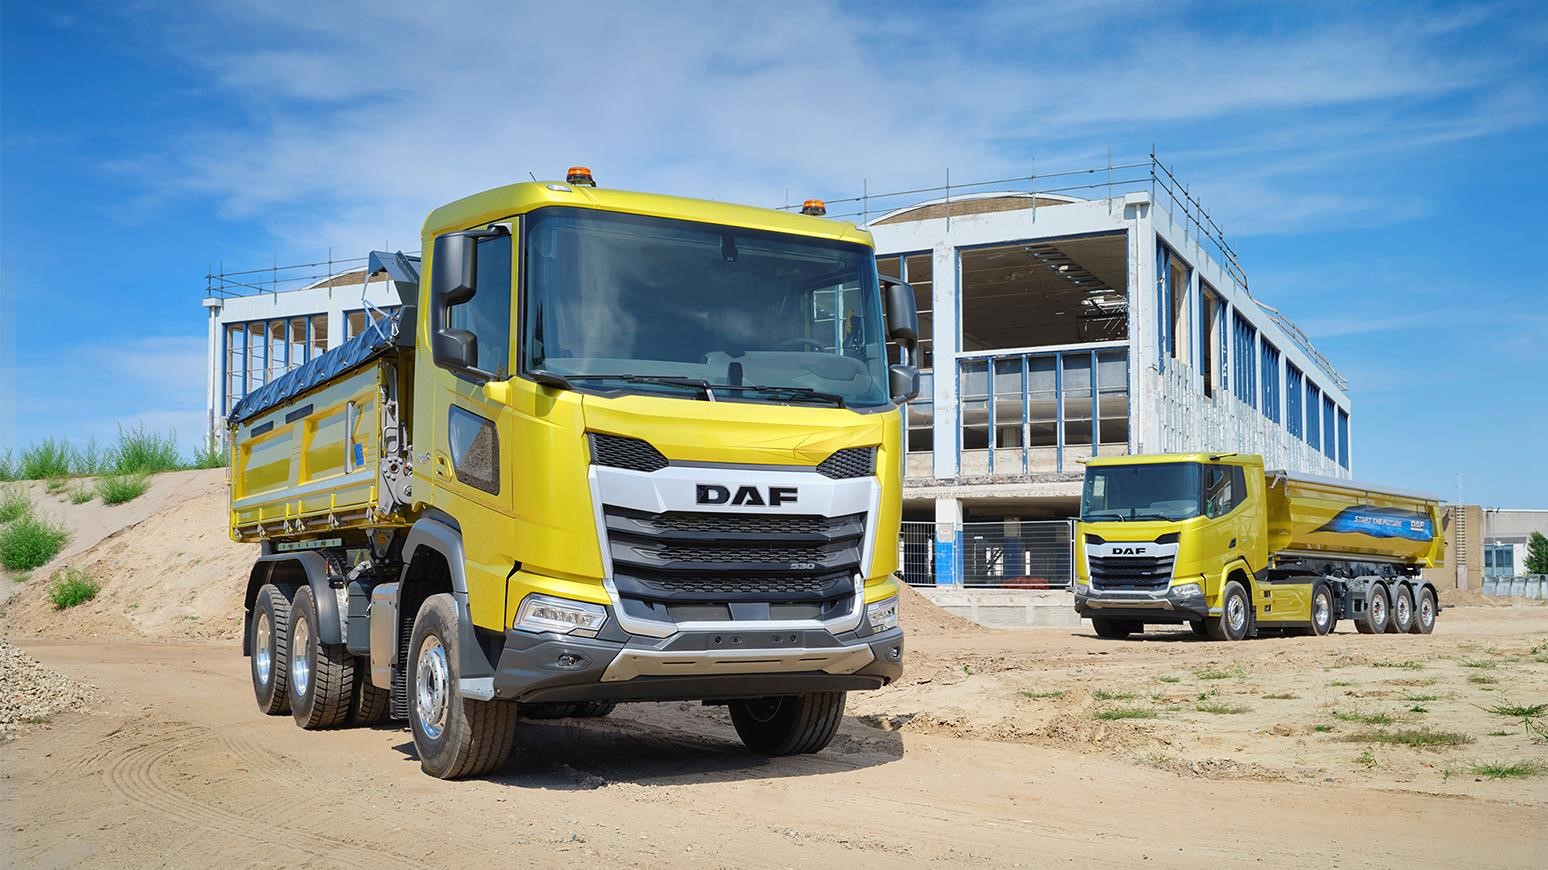 Daf Bolsters New Generation Vocational Truck Lineup With Introduction Of New Tractor Units & Rigids